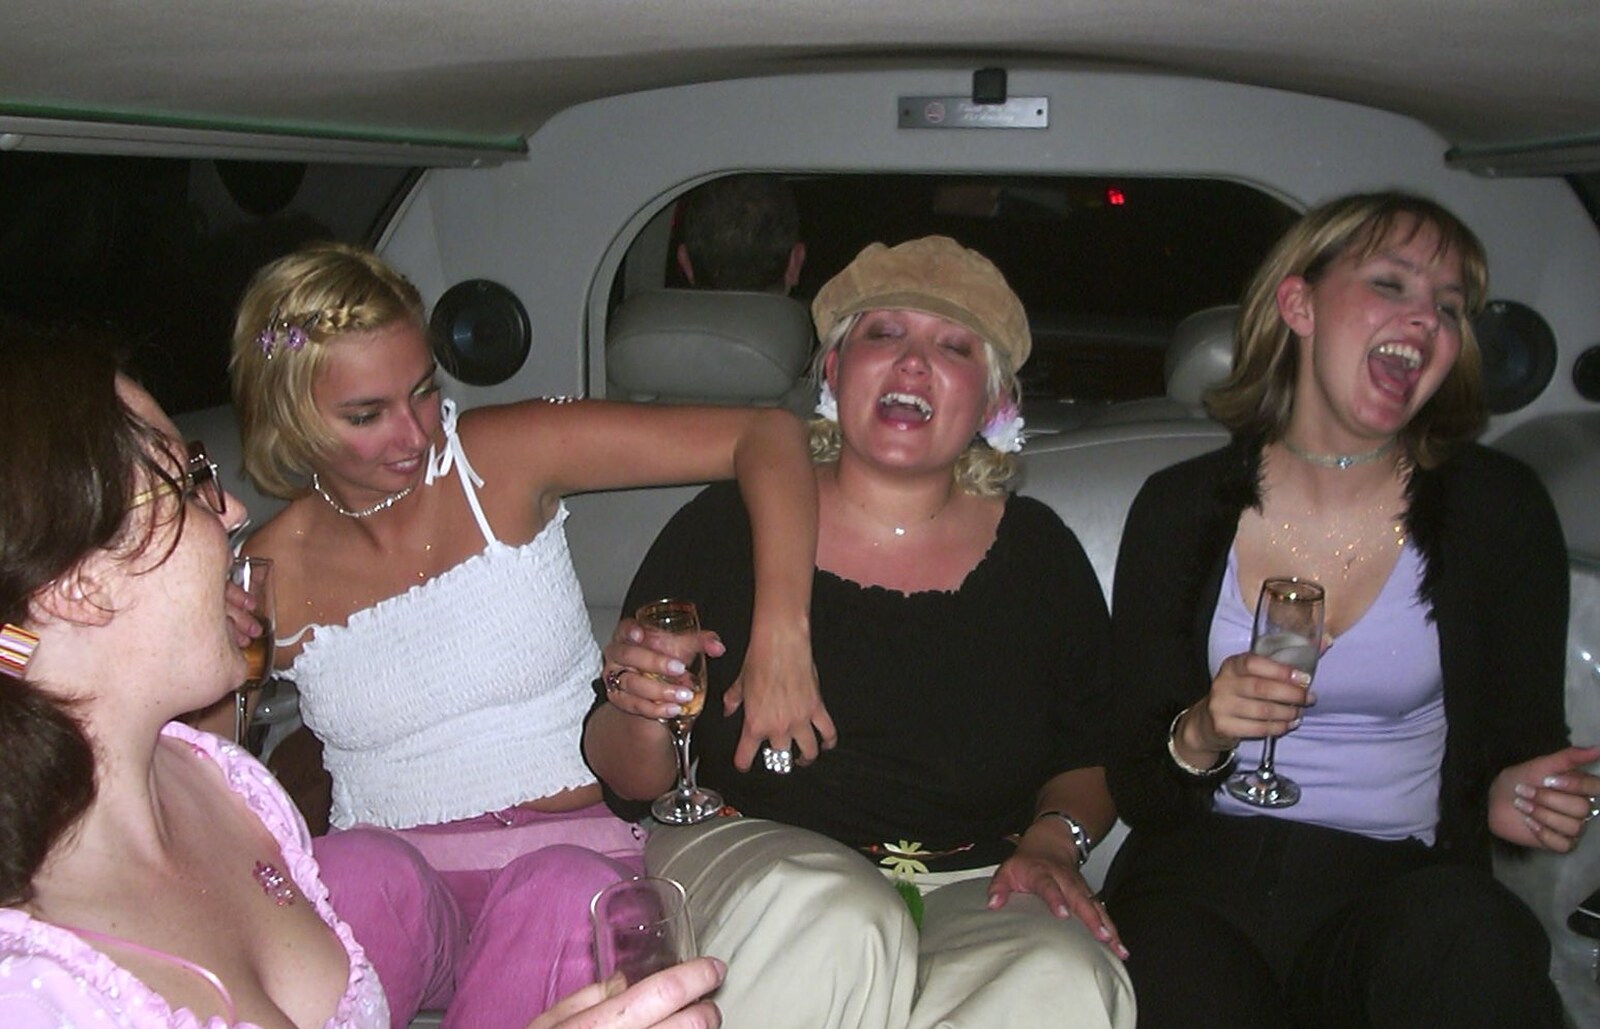 More back-of-the-limo hilarity from 3G Lab's Carwash Nightclub by Limo, London - 27th April 2002